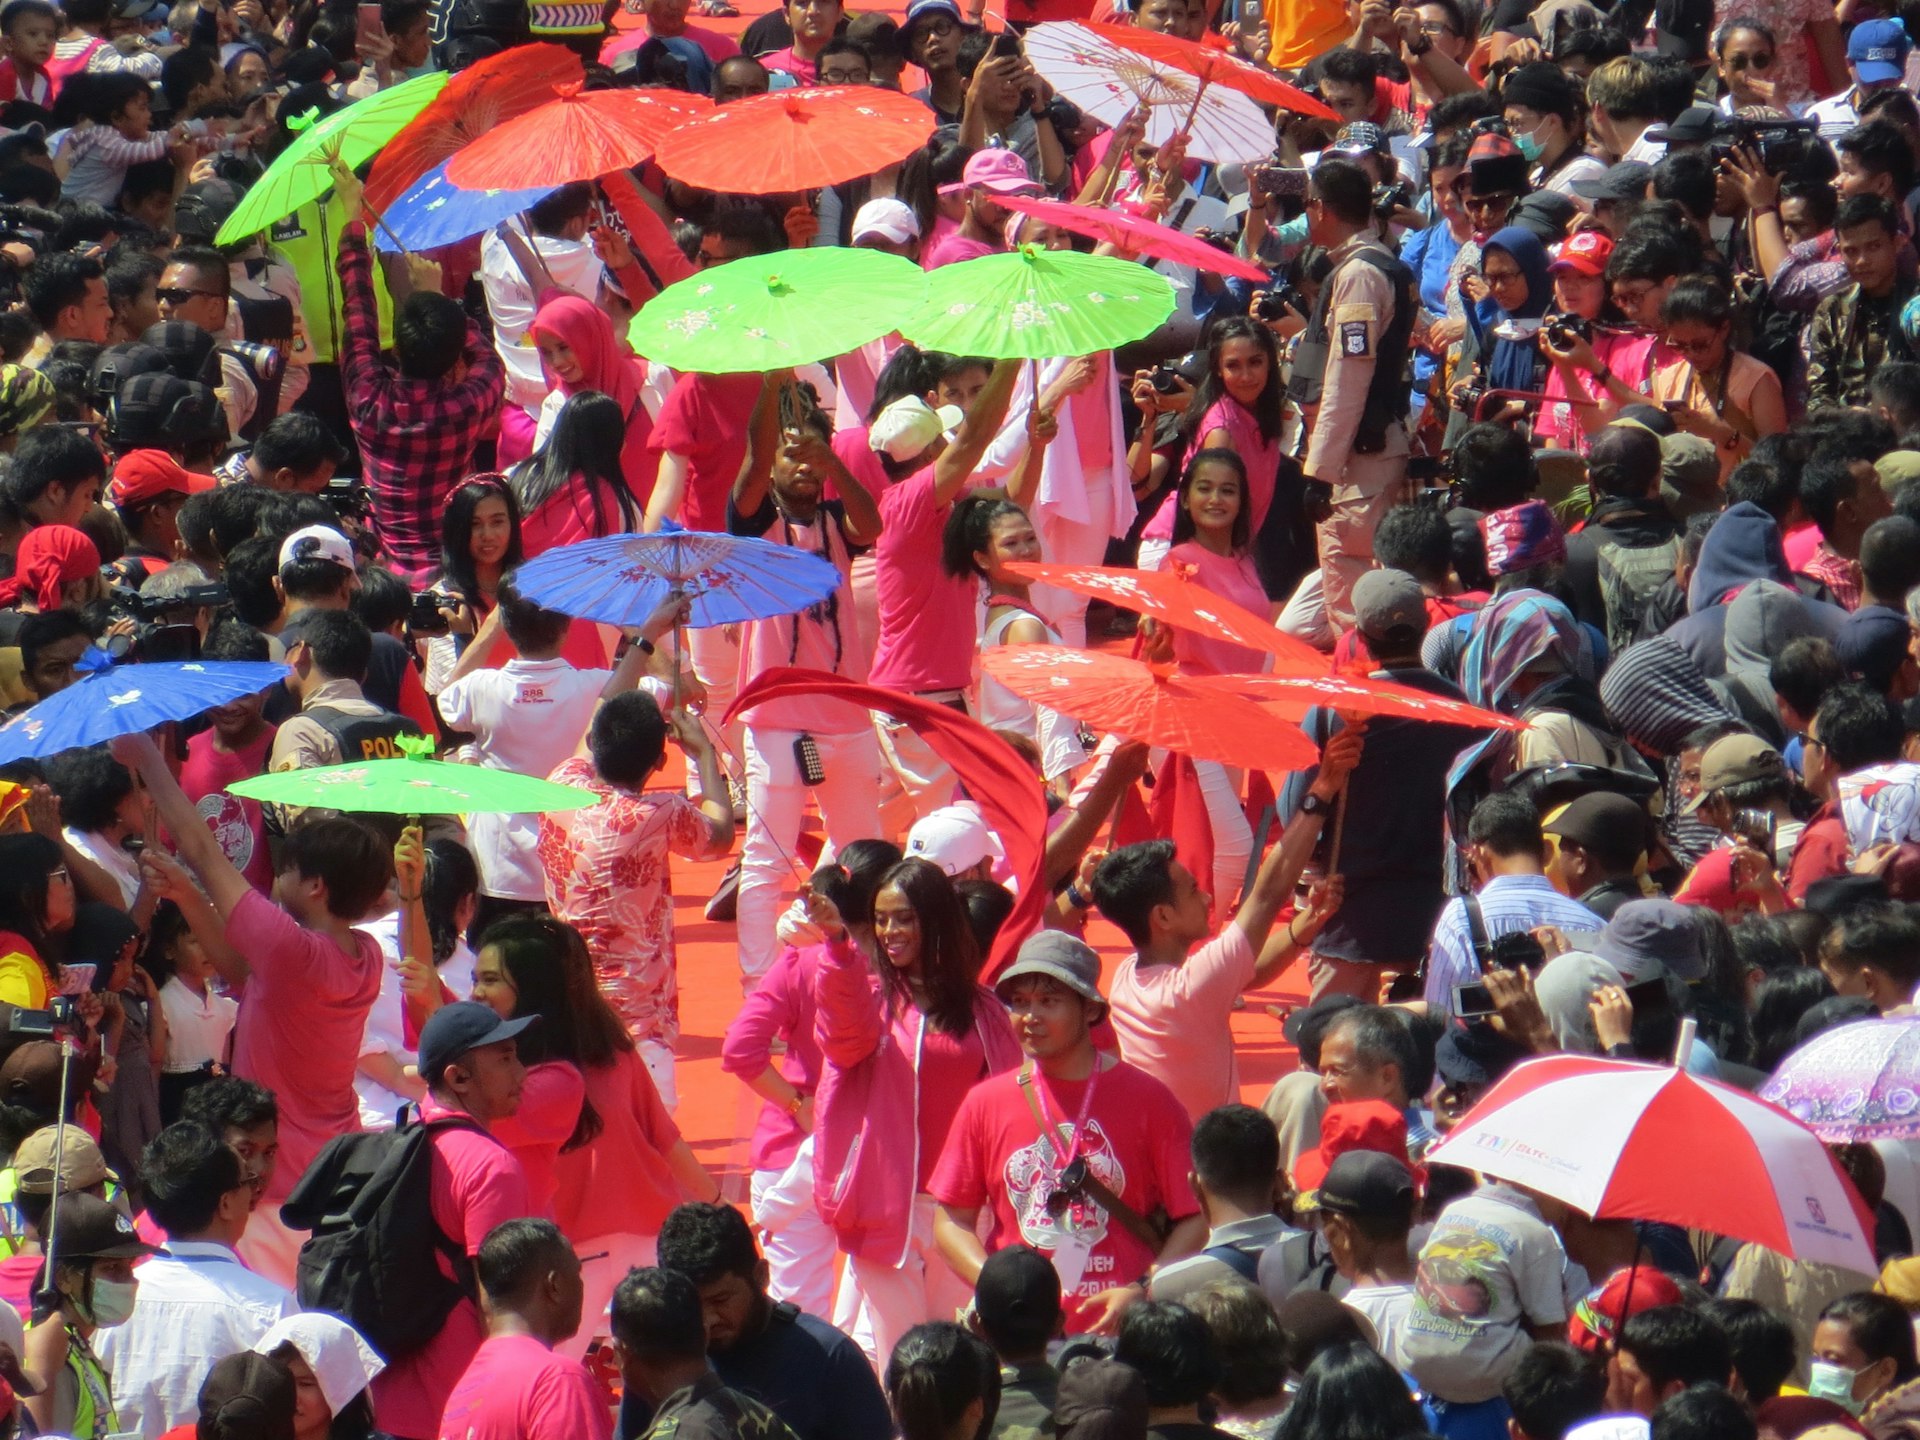 Carnival crowds with colorful parasols in Glodok, Jakarta's Chinatown